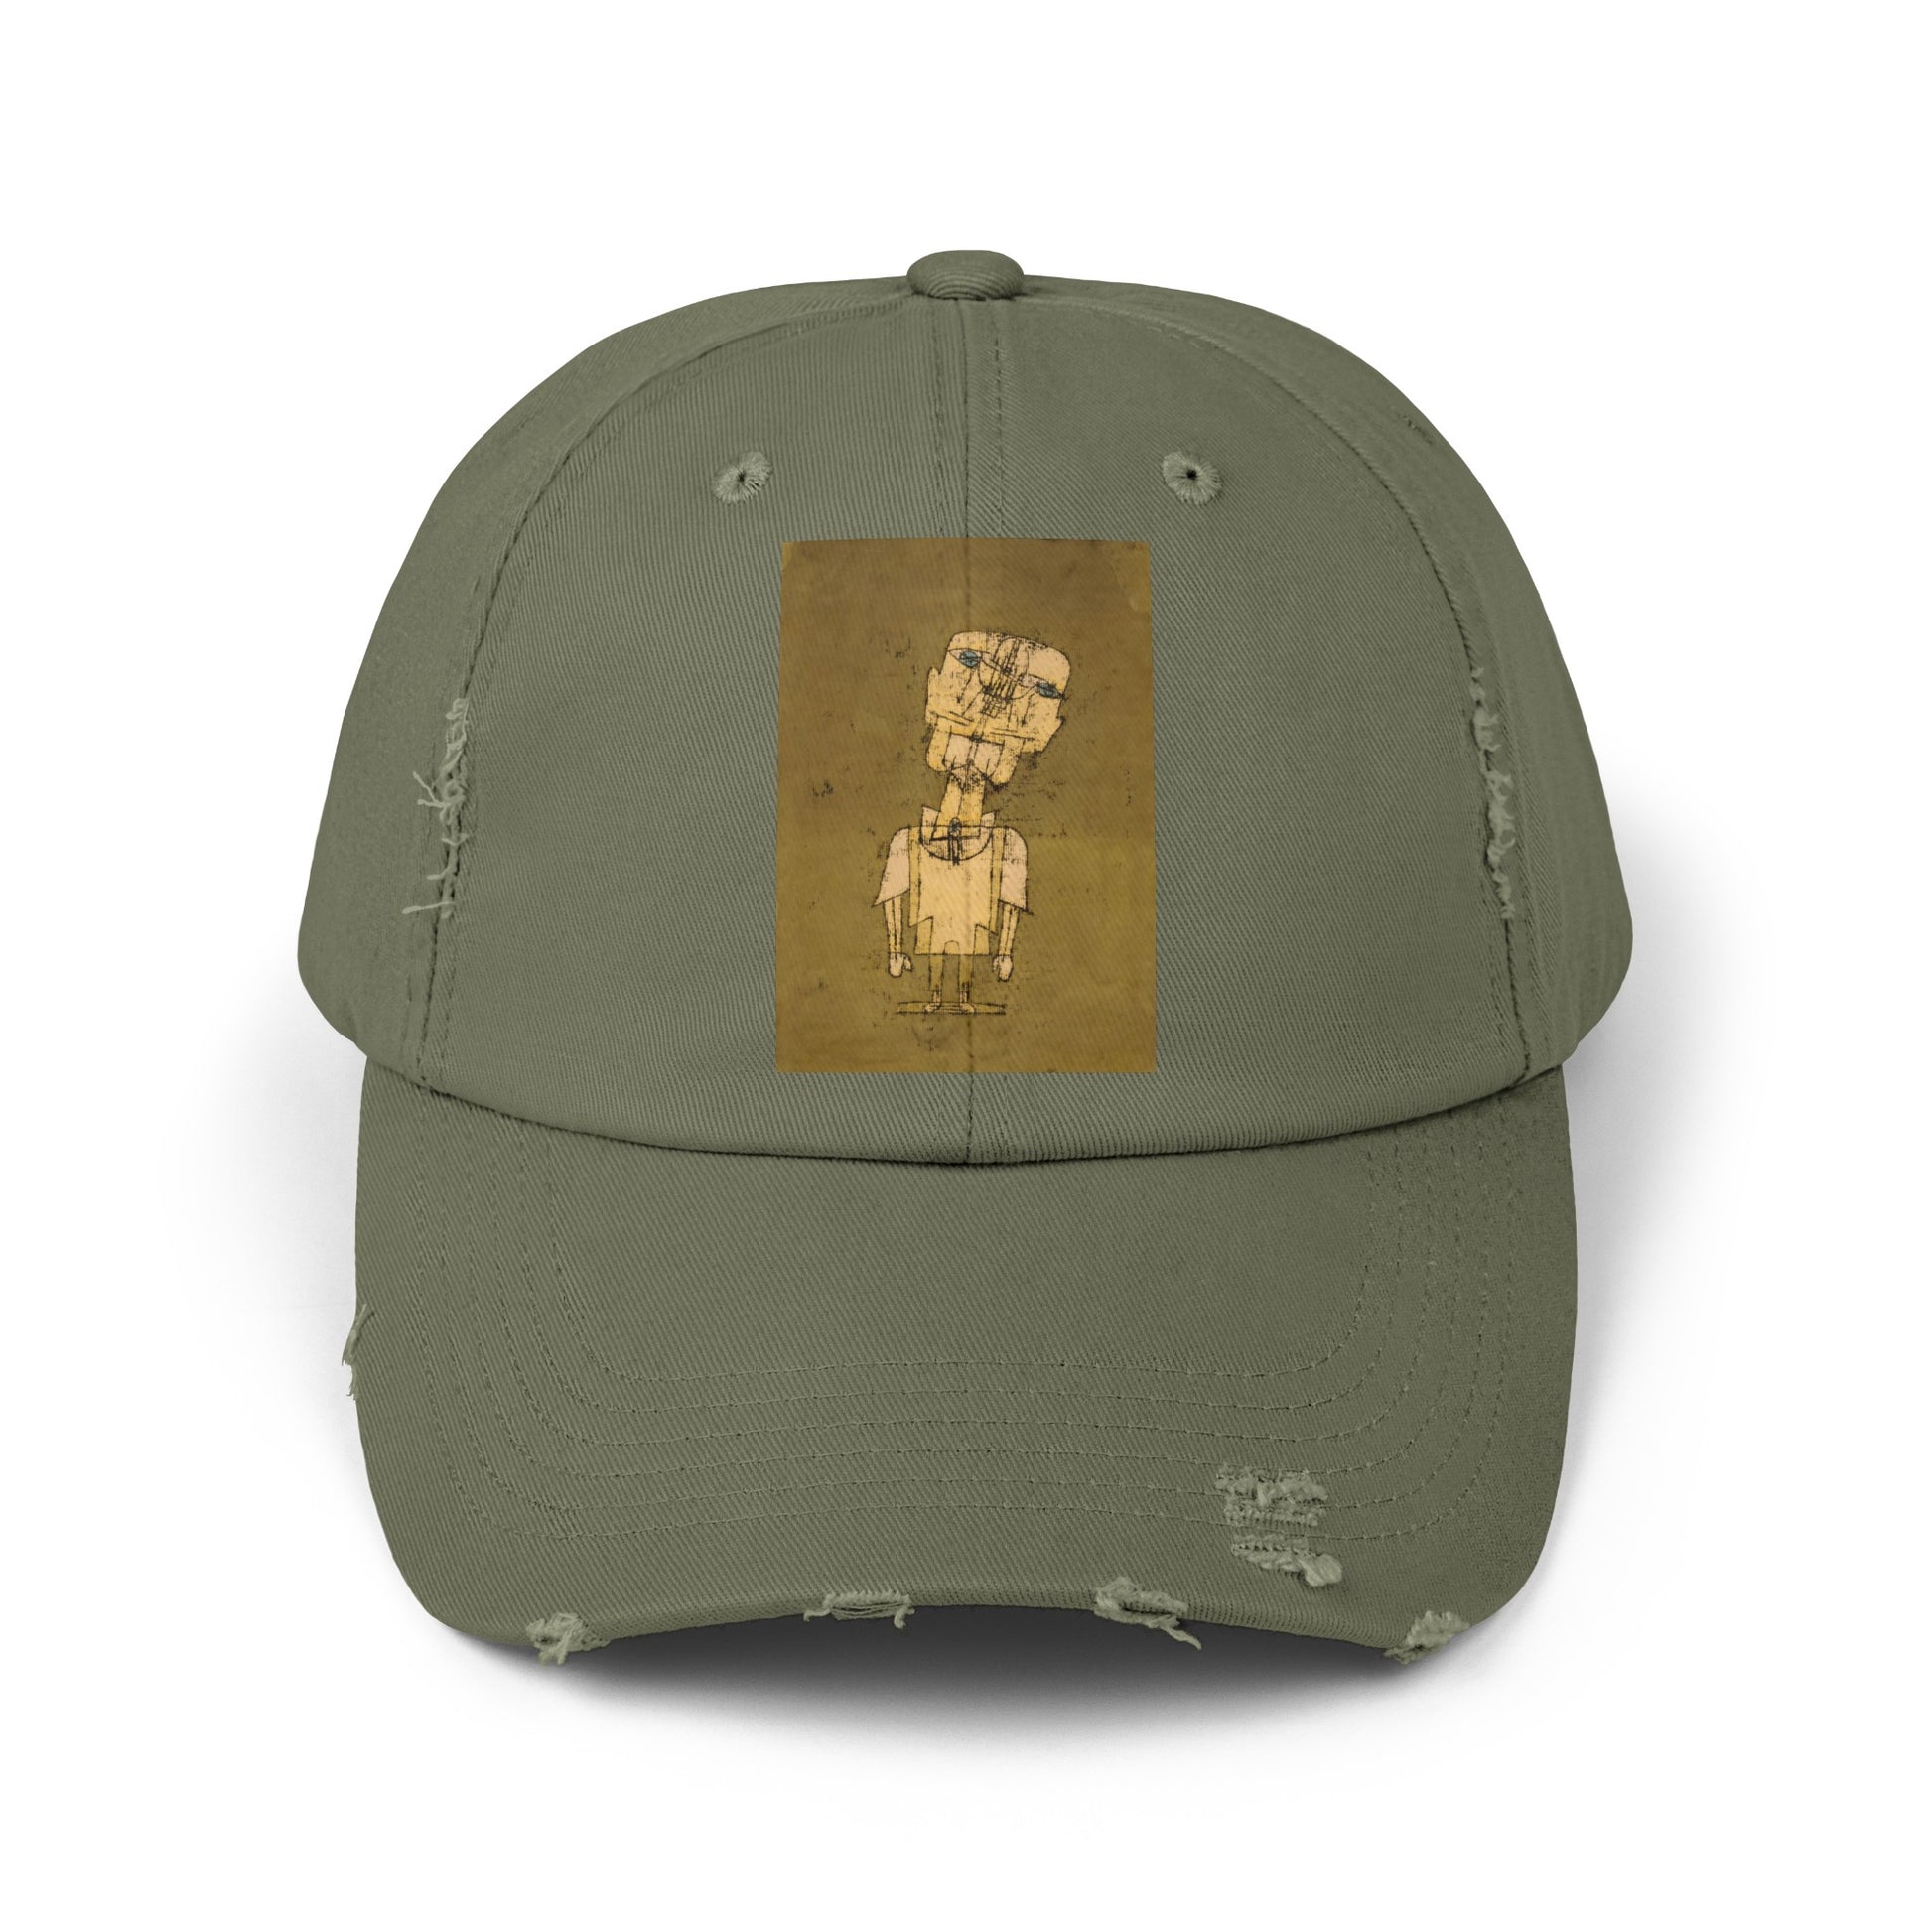 a green baseball cap with a picture of a man on it